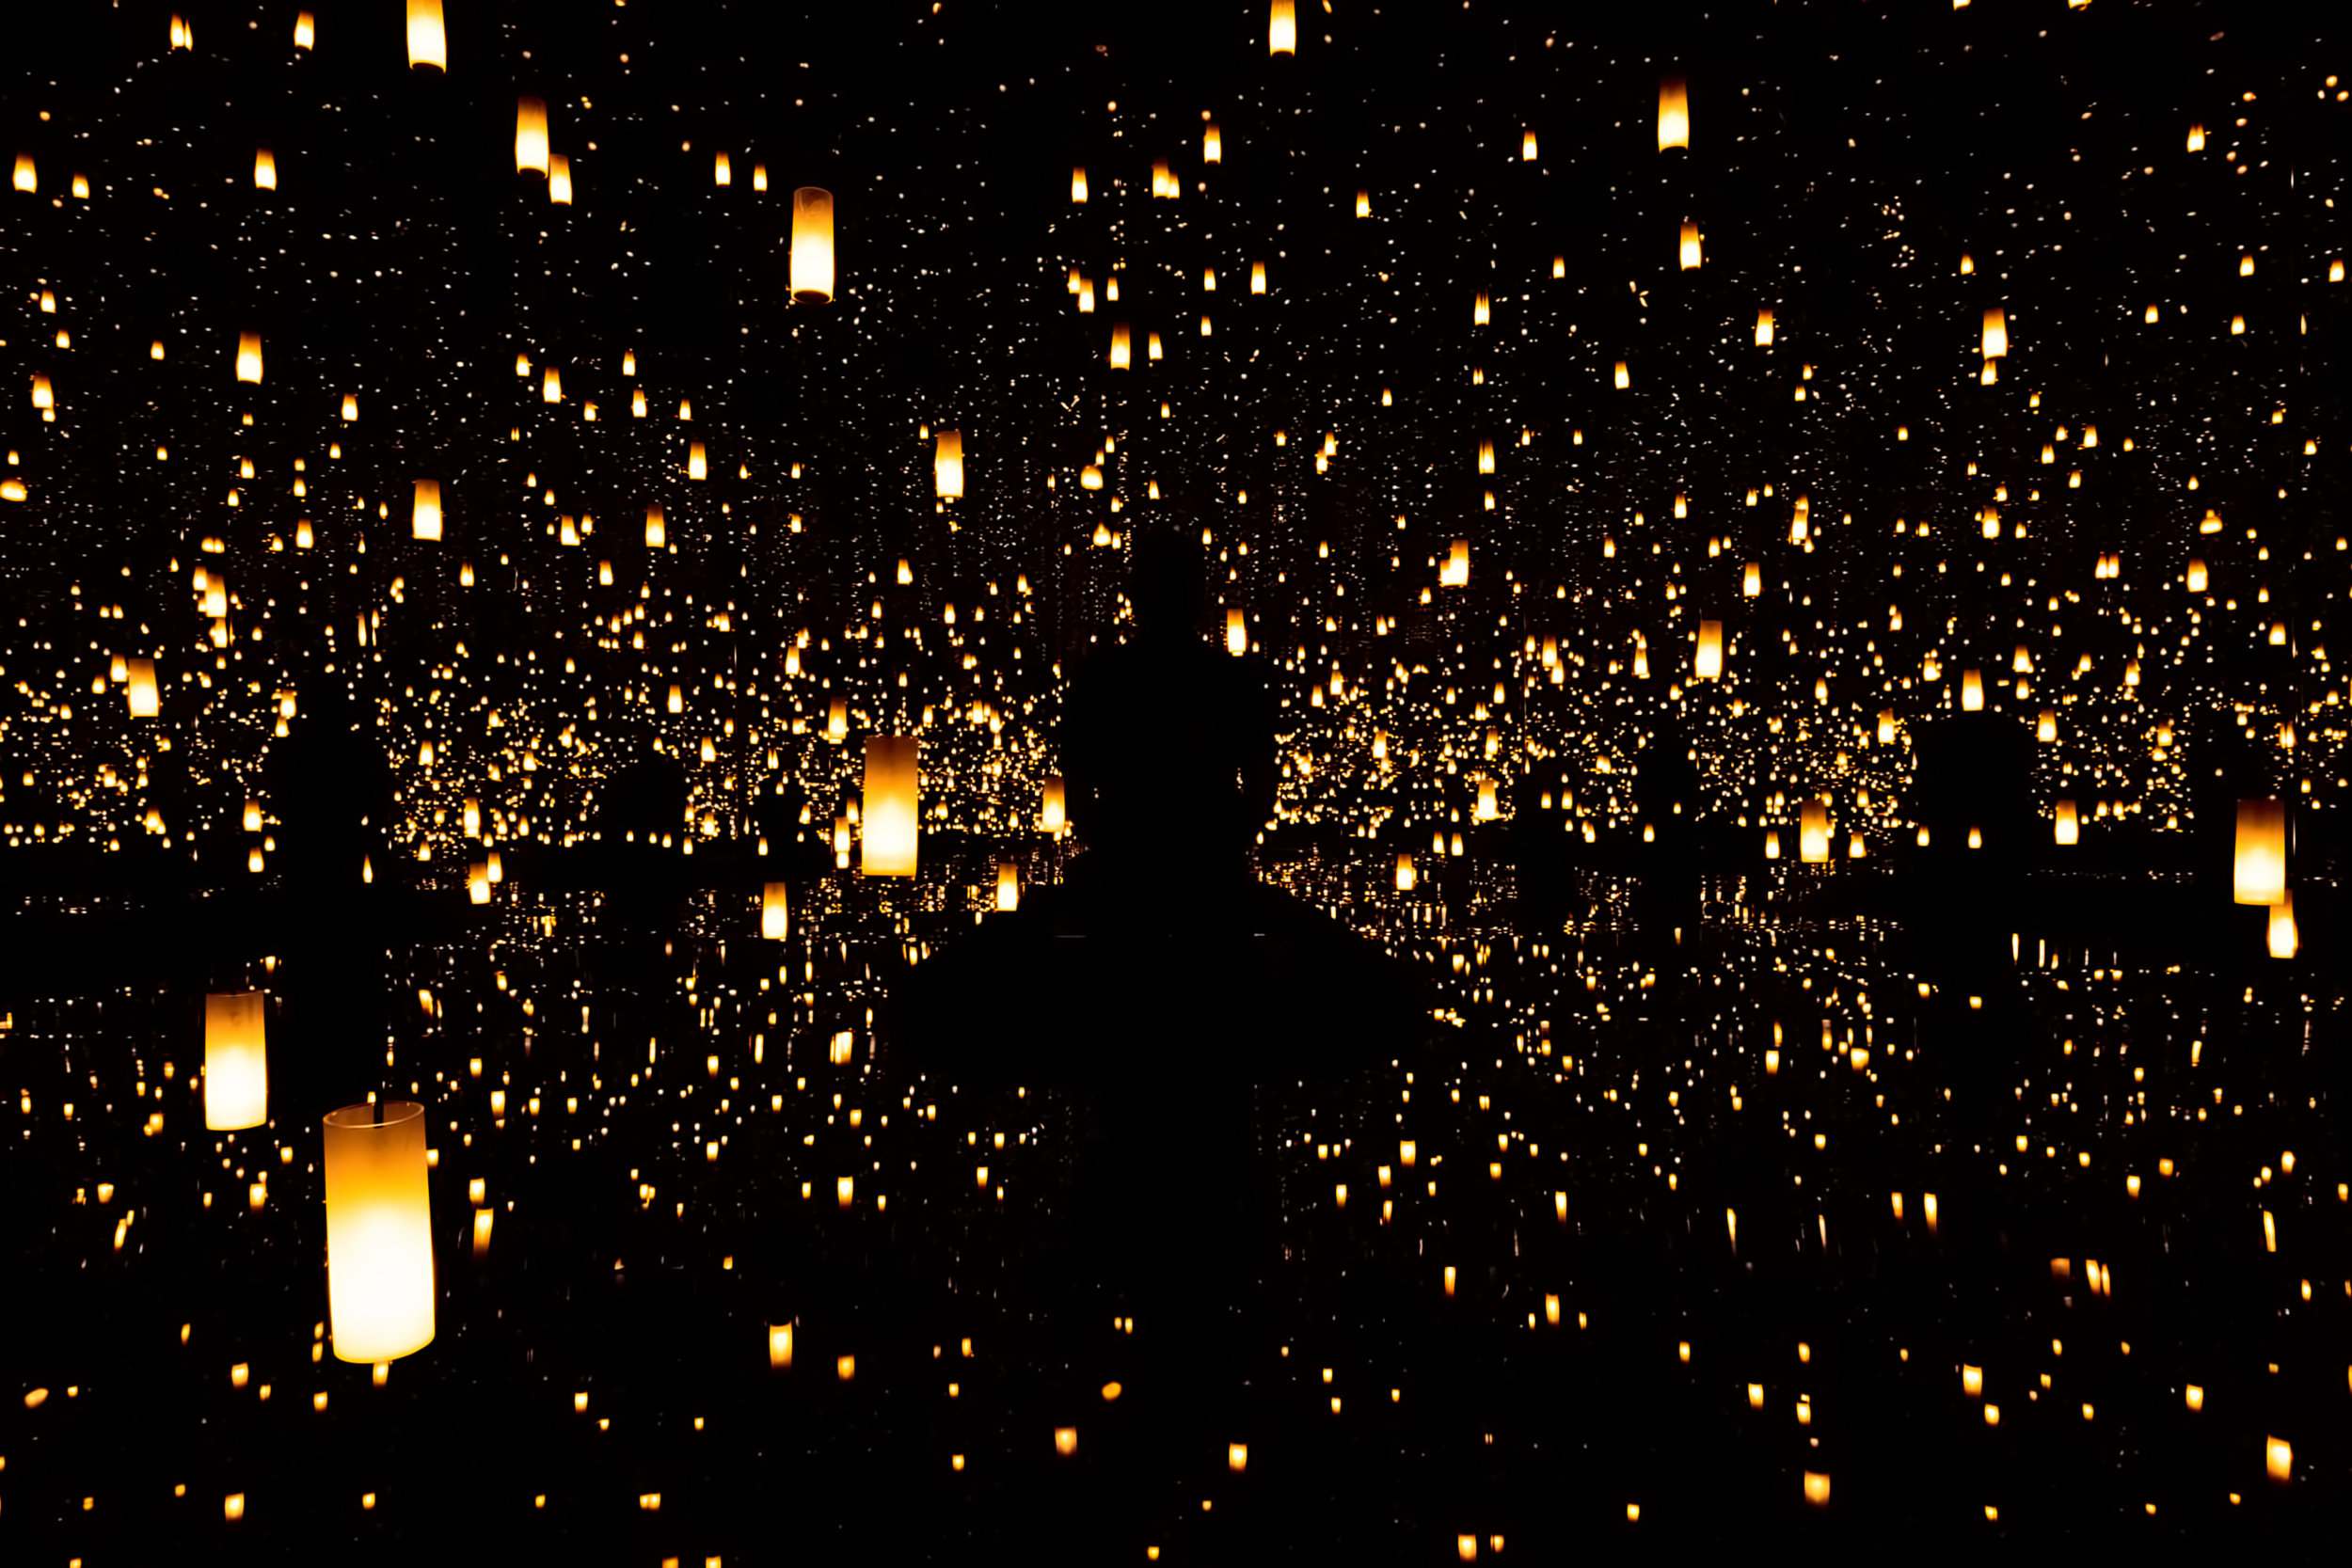  Infinity Mirrored Room — Aftermath of Obliteration of Eternity (my favorite) 